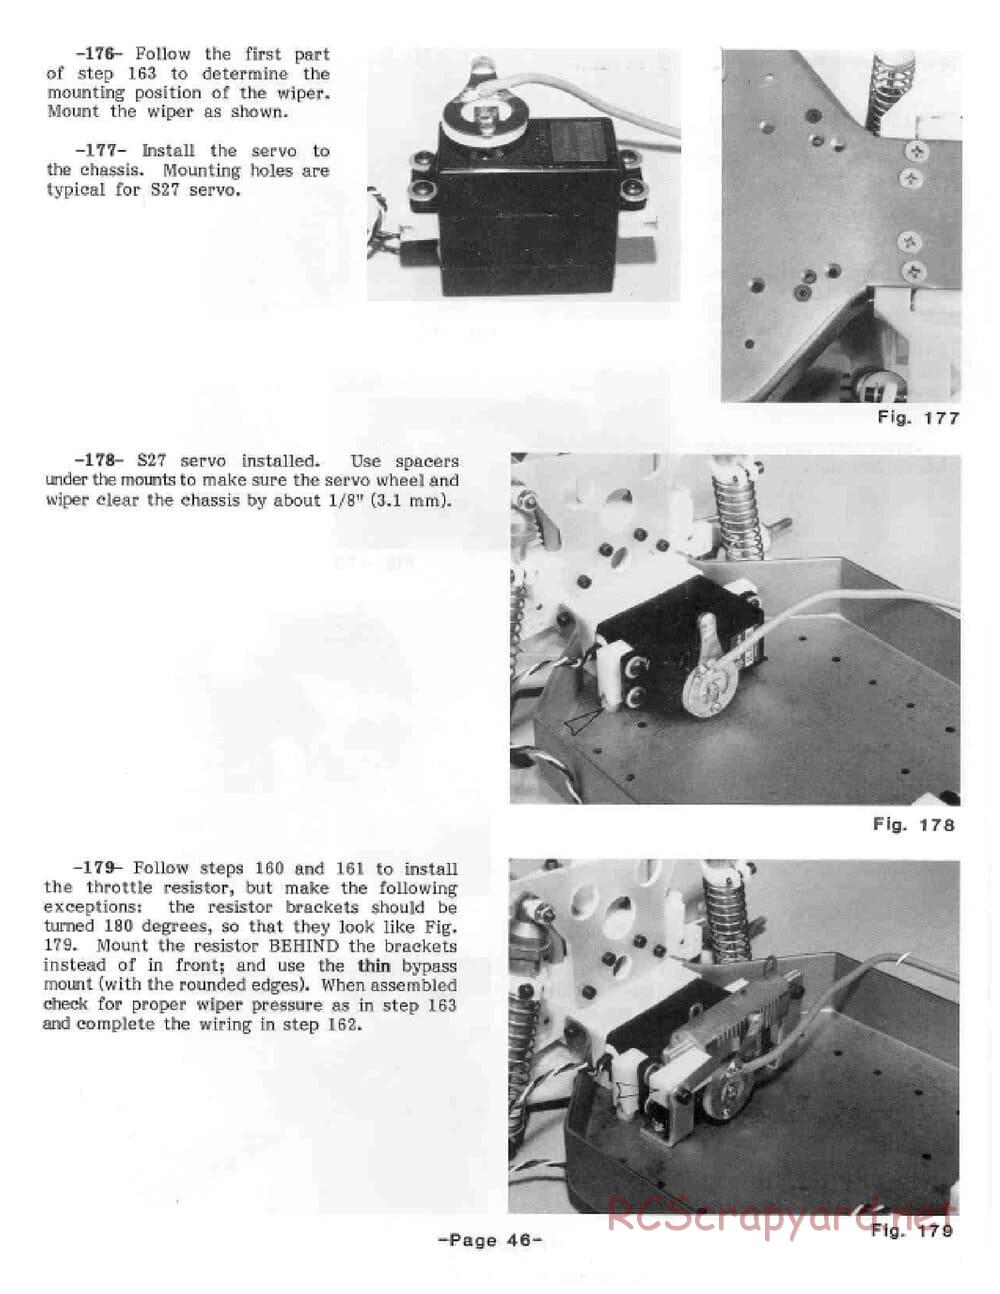 Team Associated - RC10 - 1986 Cadillac Manual - Page 48